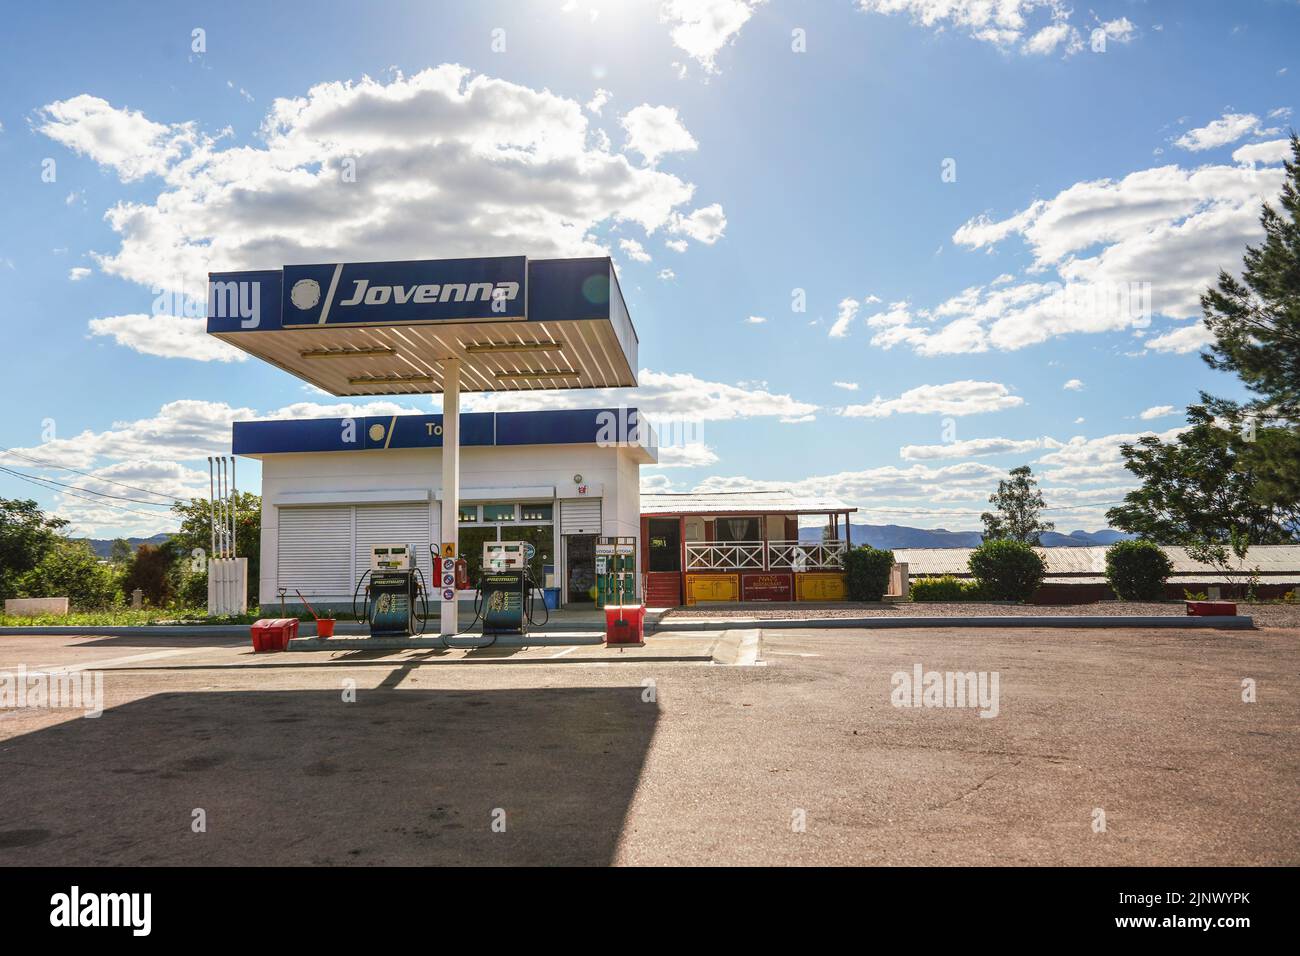 Ranohira, Madagascar - May 05, 2019: Typical gas station (blue Jovenna brand) at Madagascar on sunny day. Empty concrete parking lot in front of fuel Stock Photo